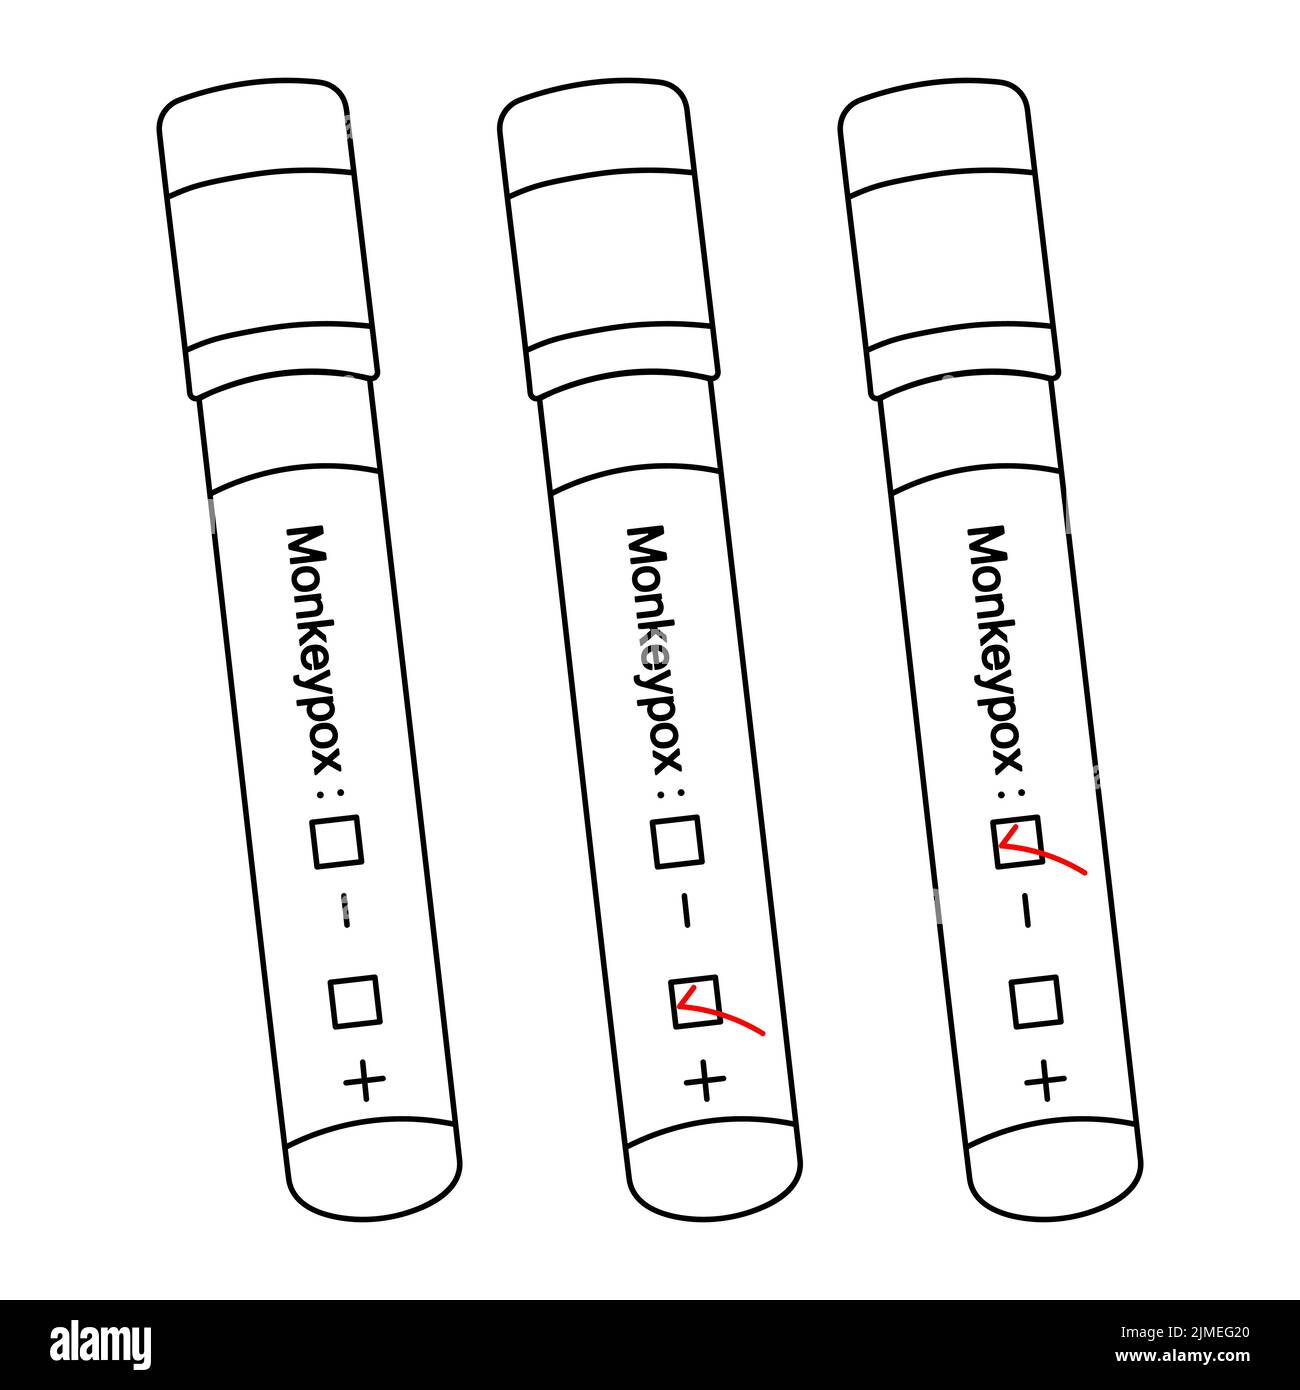 Diagnosis of blood samples for monkeypox virus. Test tubes with patient tests. Set of vector illustrations. Result: positive, negative, unfinished. Stock Vector